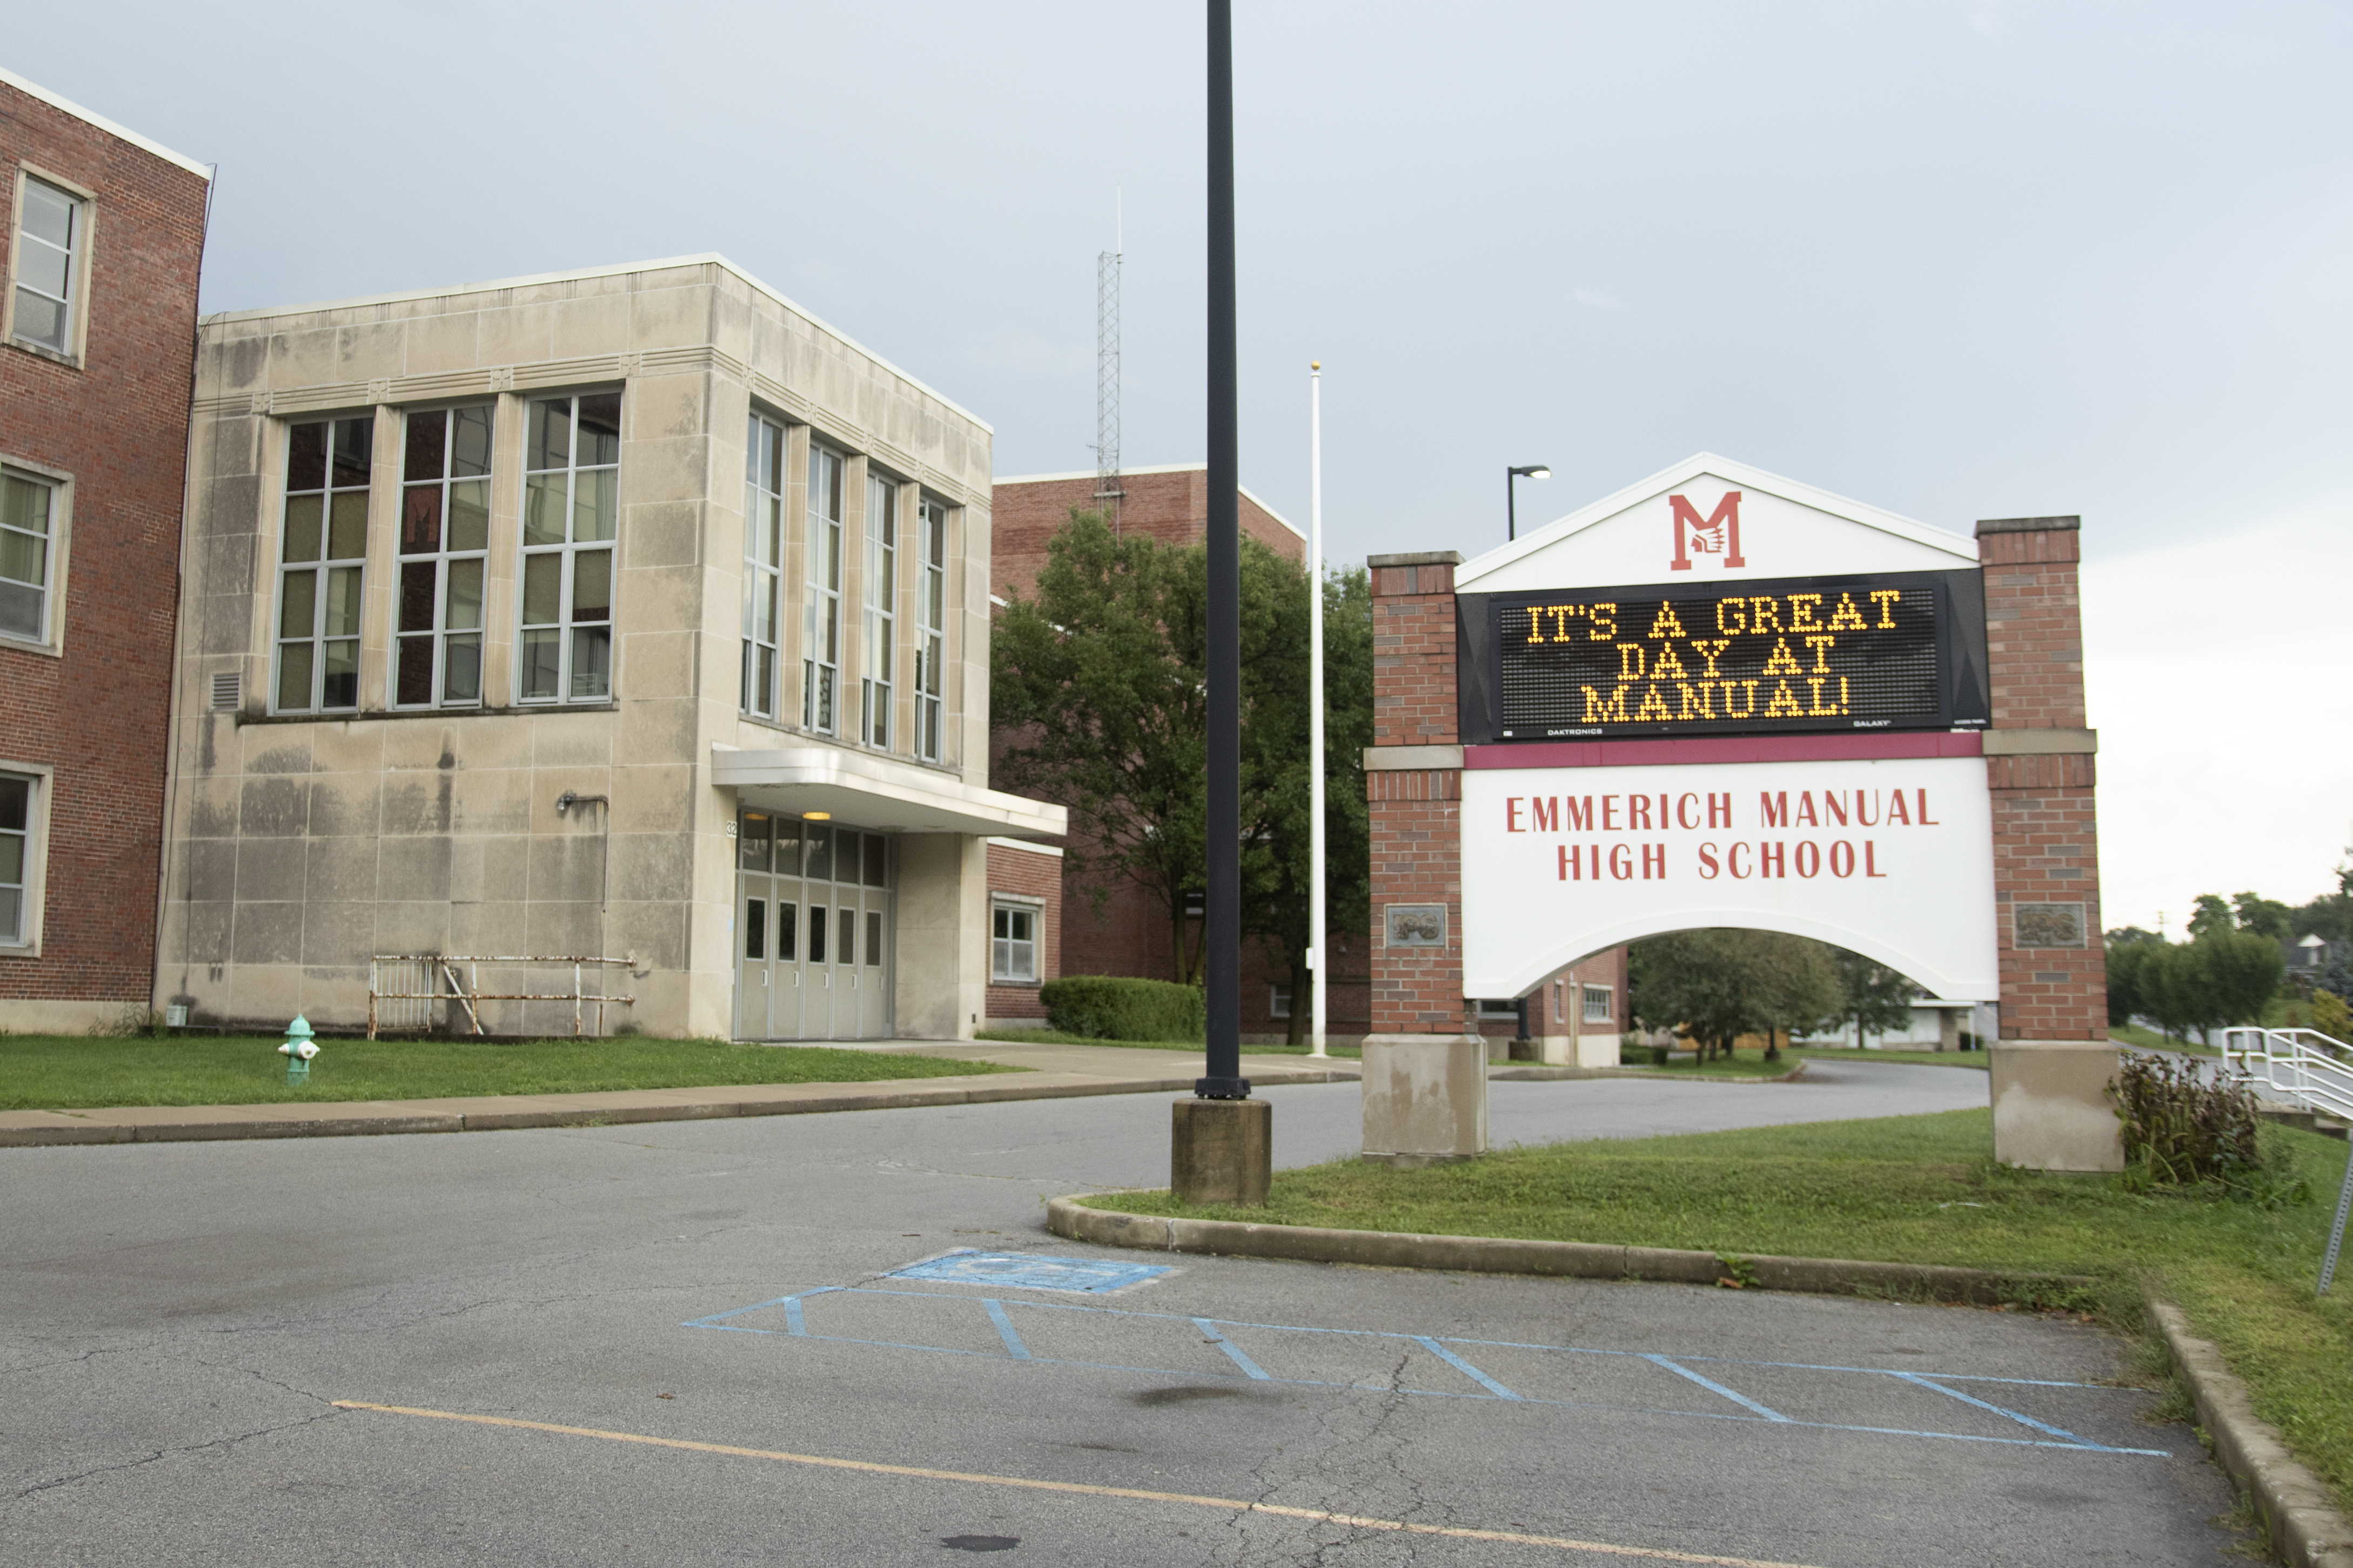 Emmerich Manual High School in Indianapolis